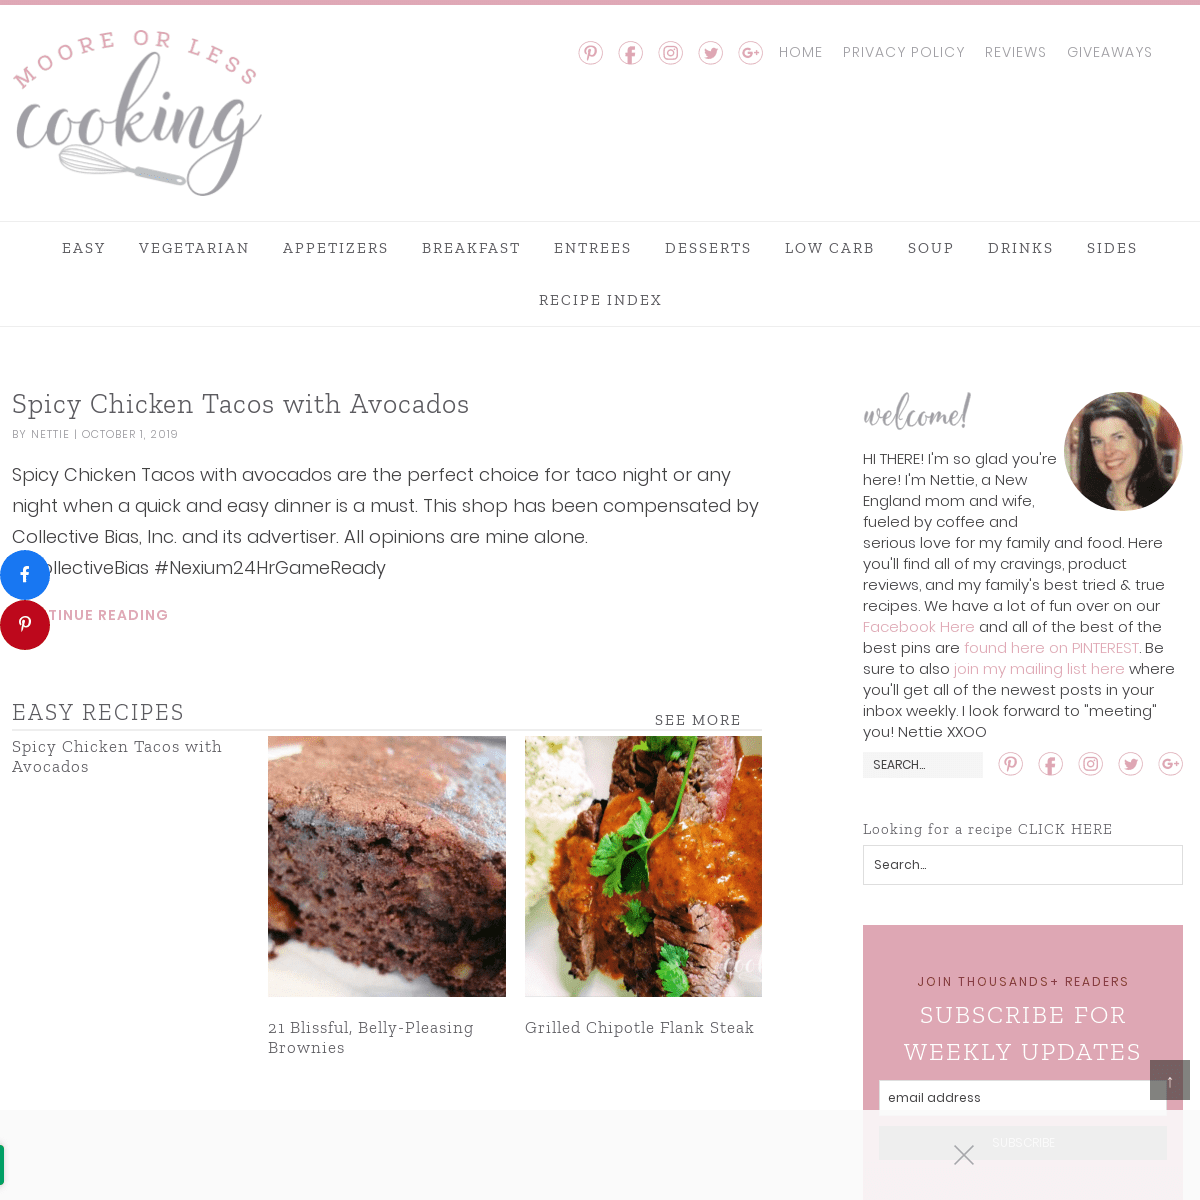 A complete backup of mooreorlesscooking.com